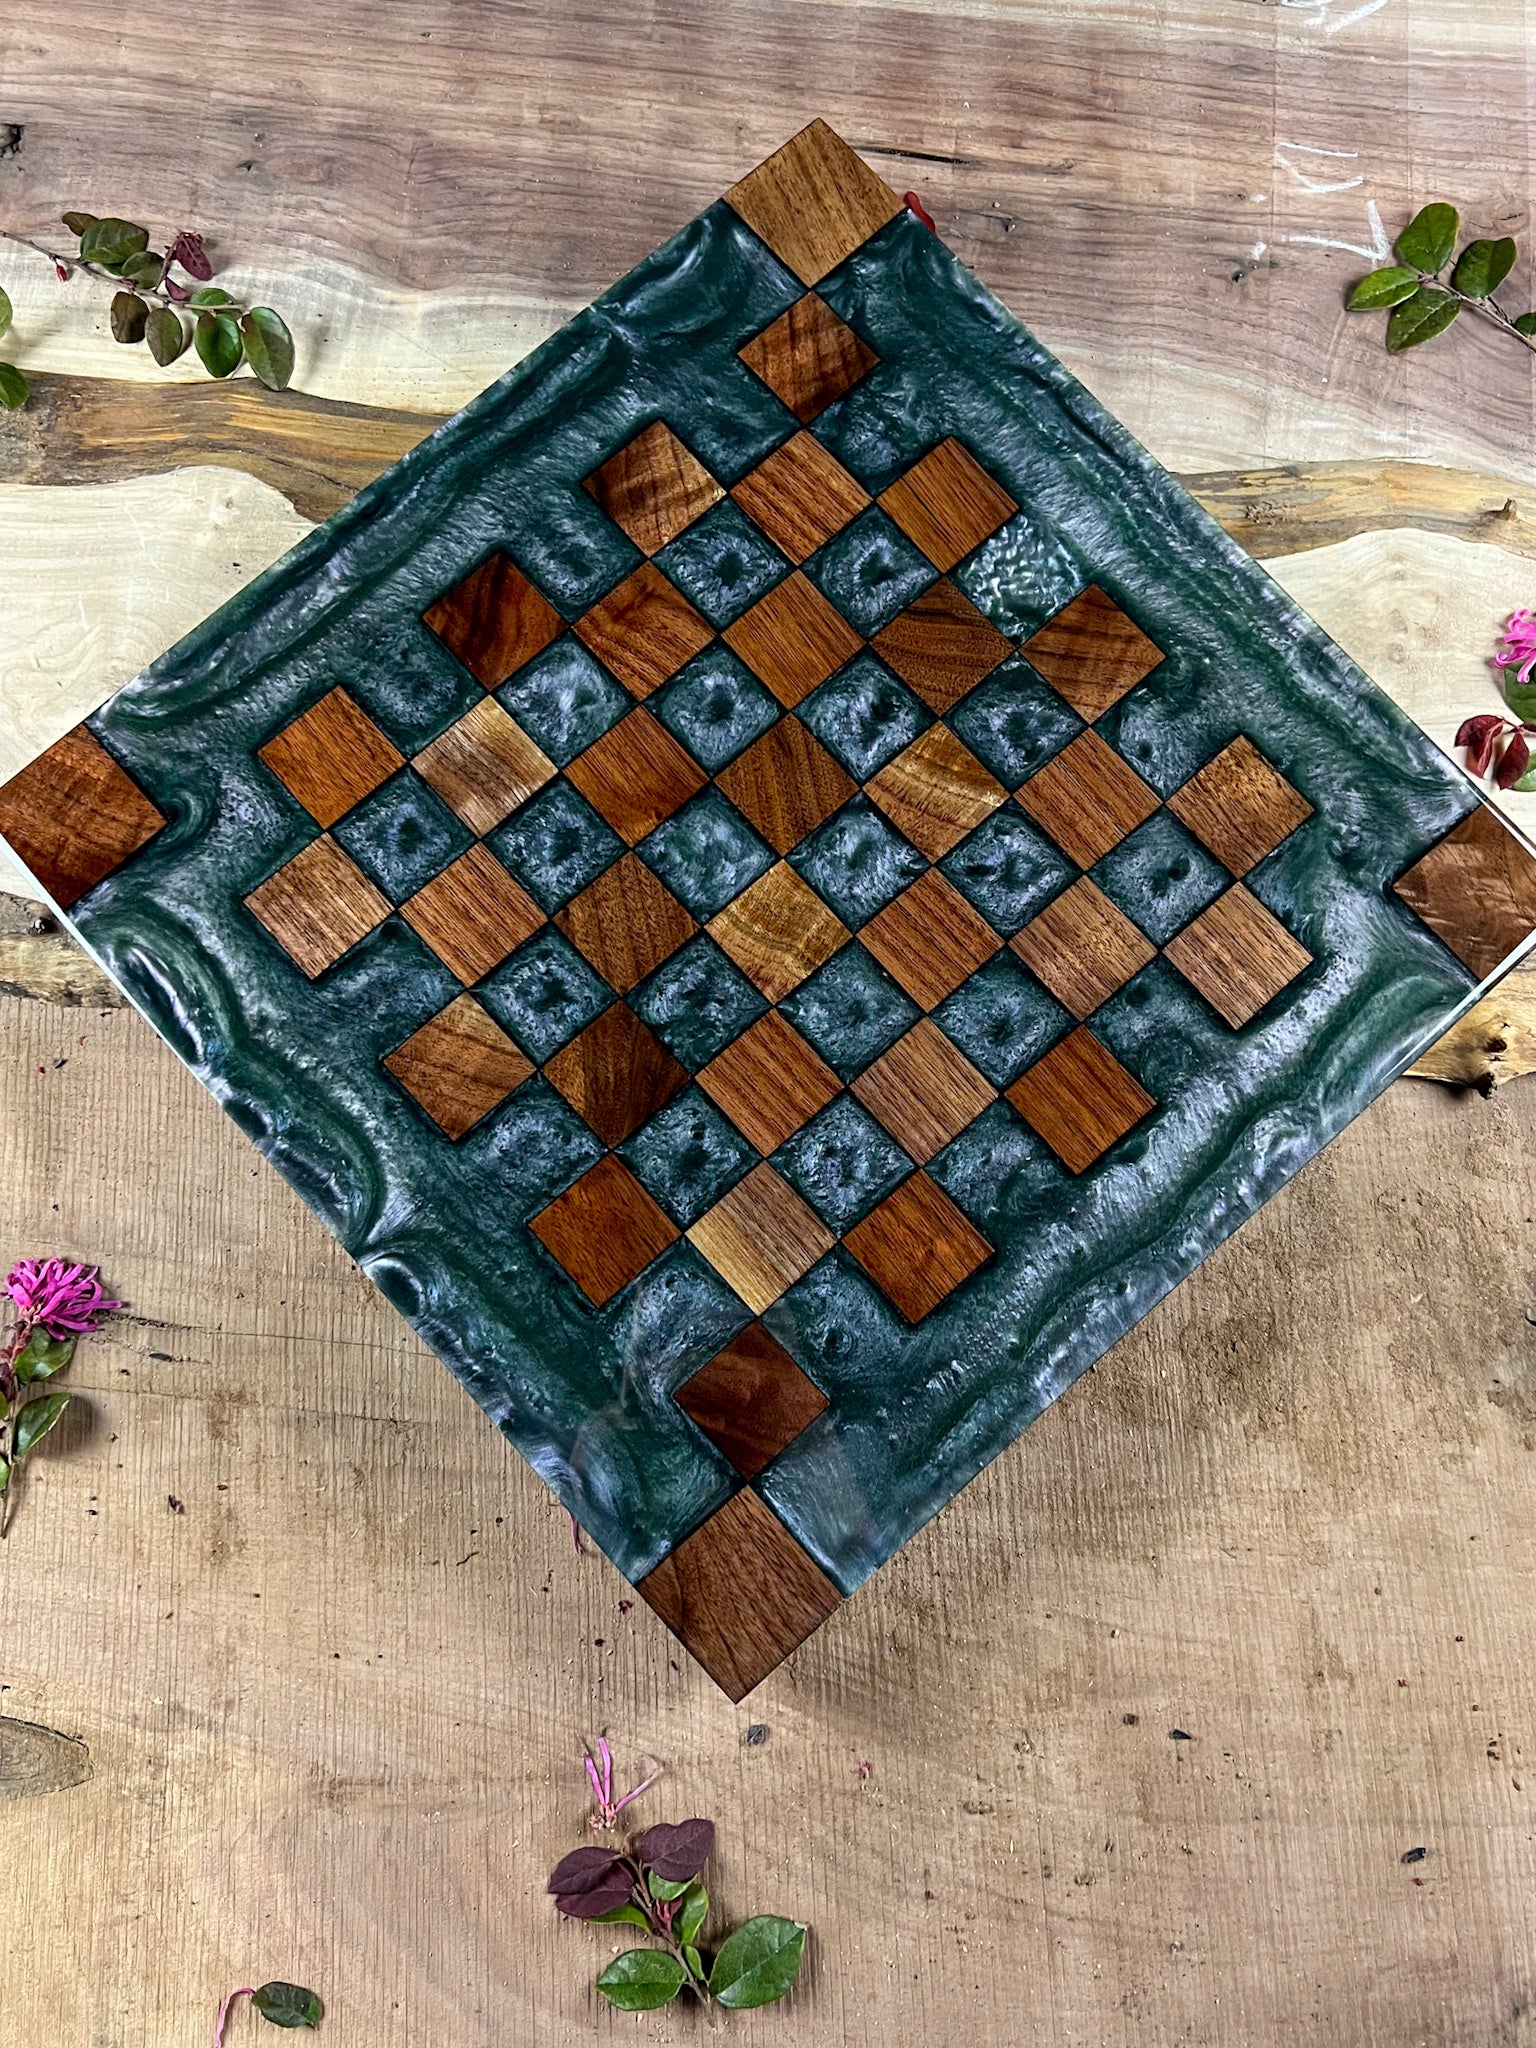 Chaos Walnut Chess Board (Chameleon Color Shifting)